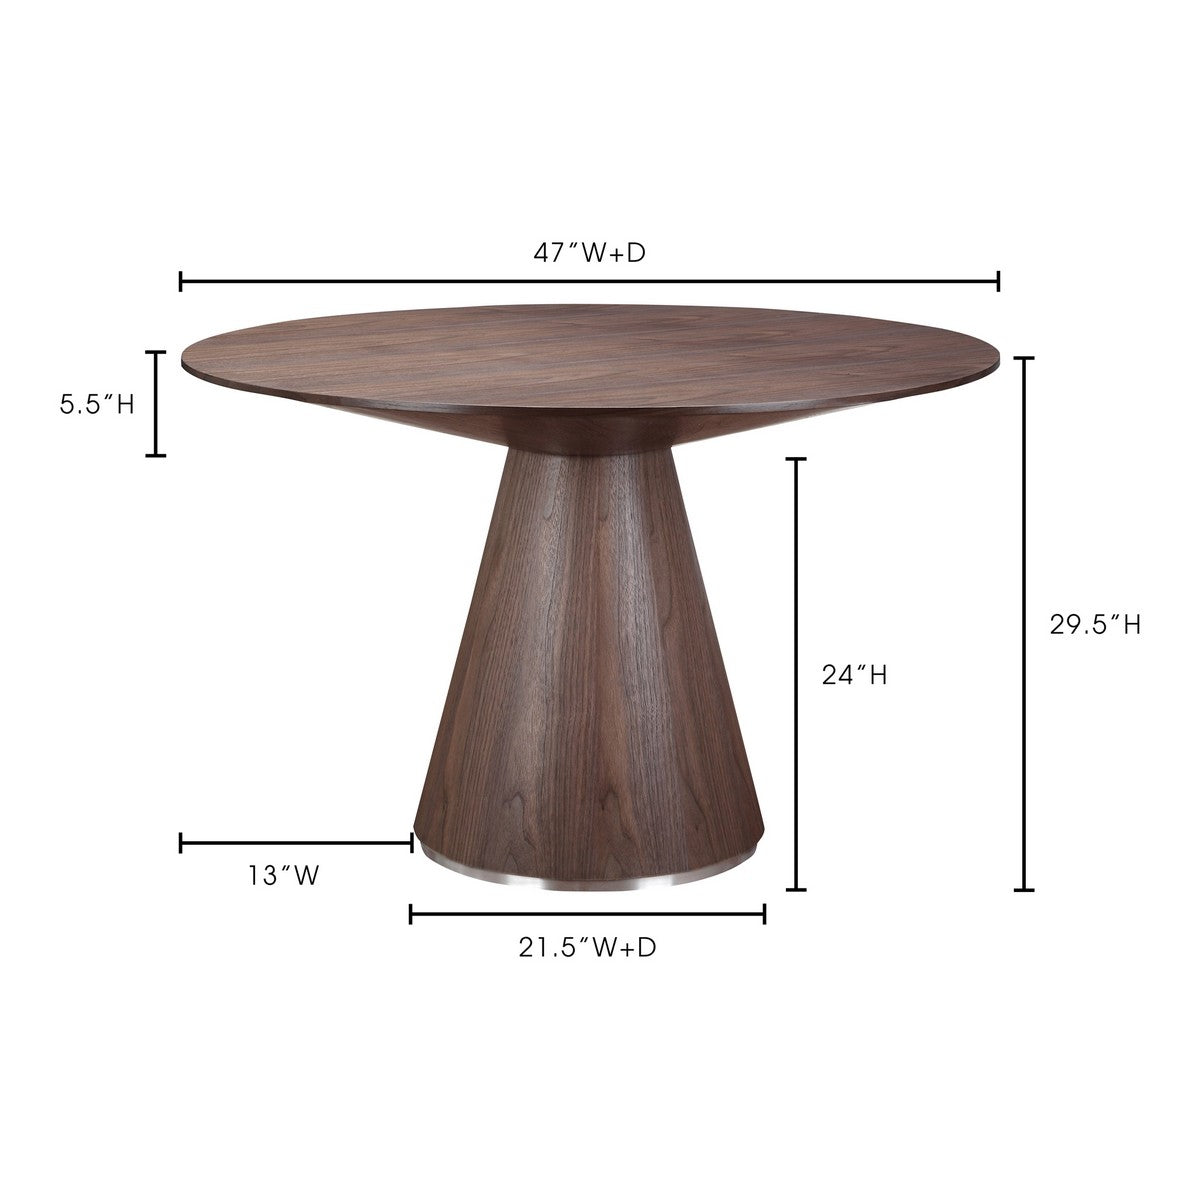 Moe's Home Collection Otago Dining Table Round Walnut - KC-1028-03